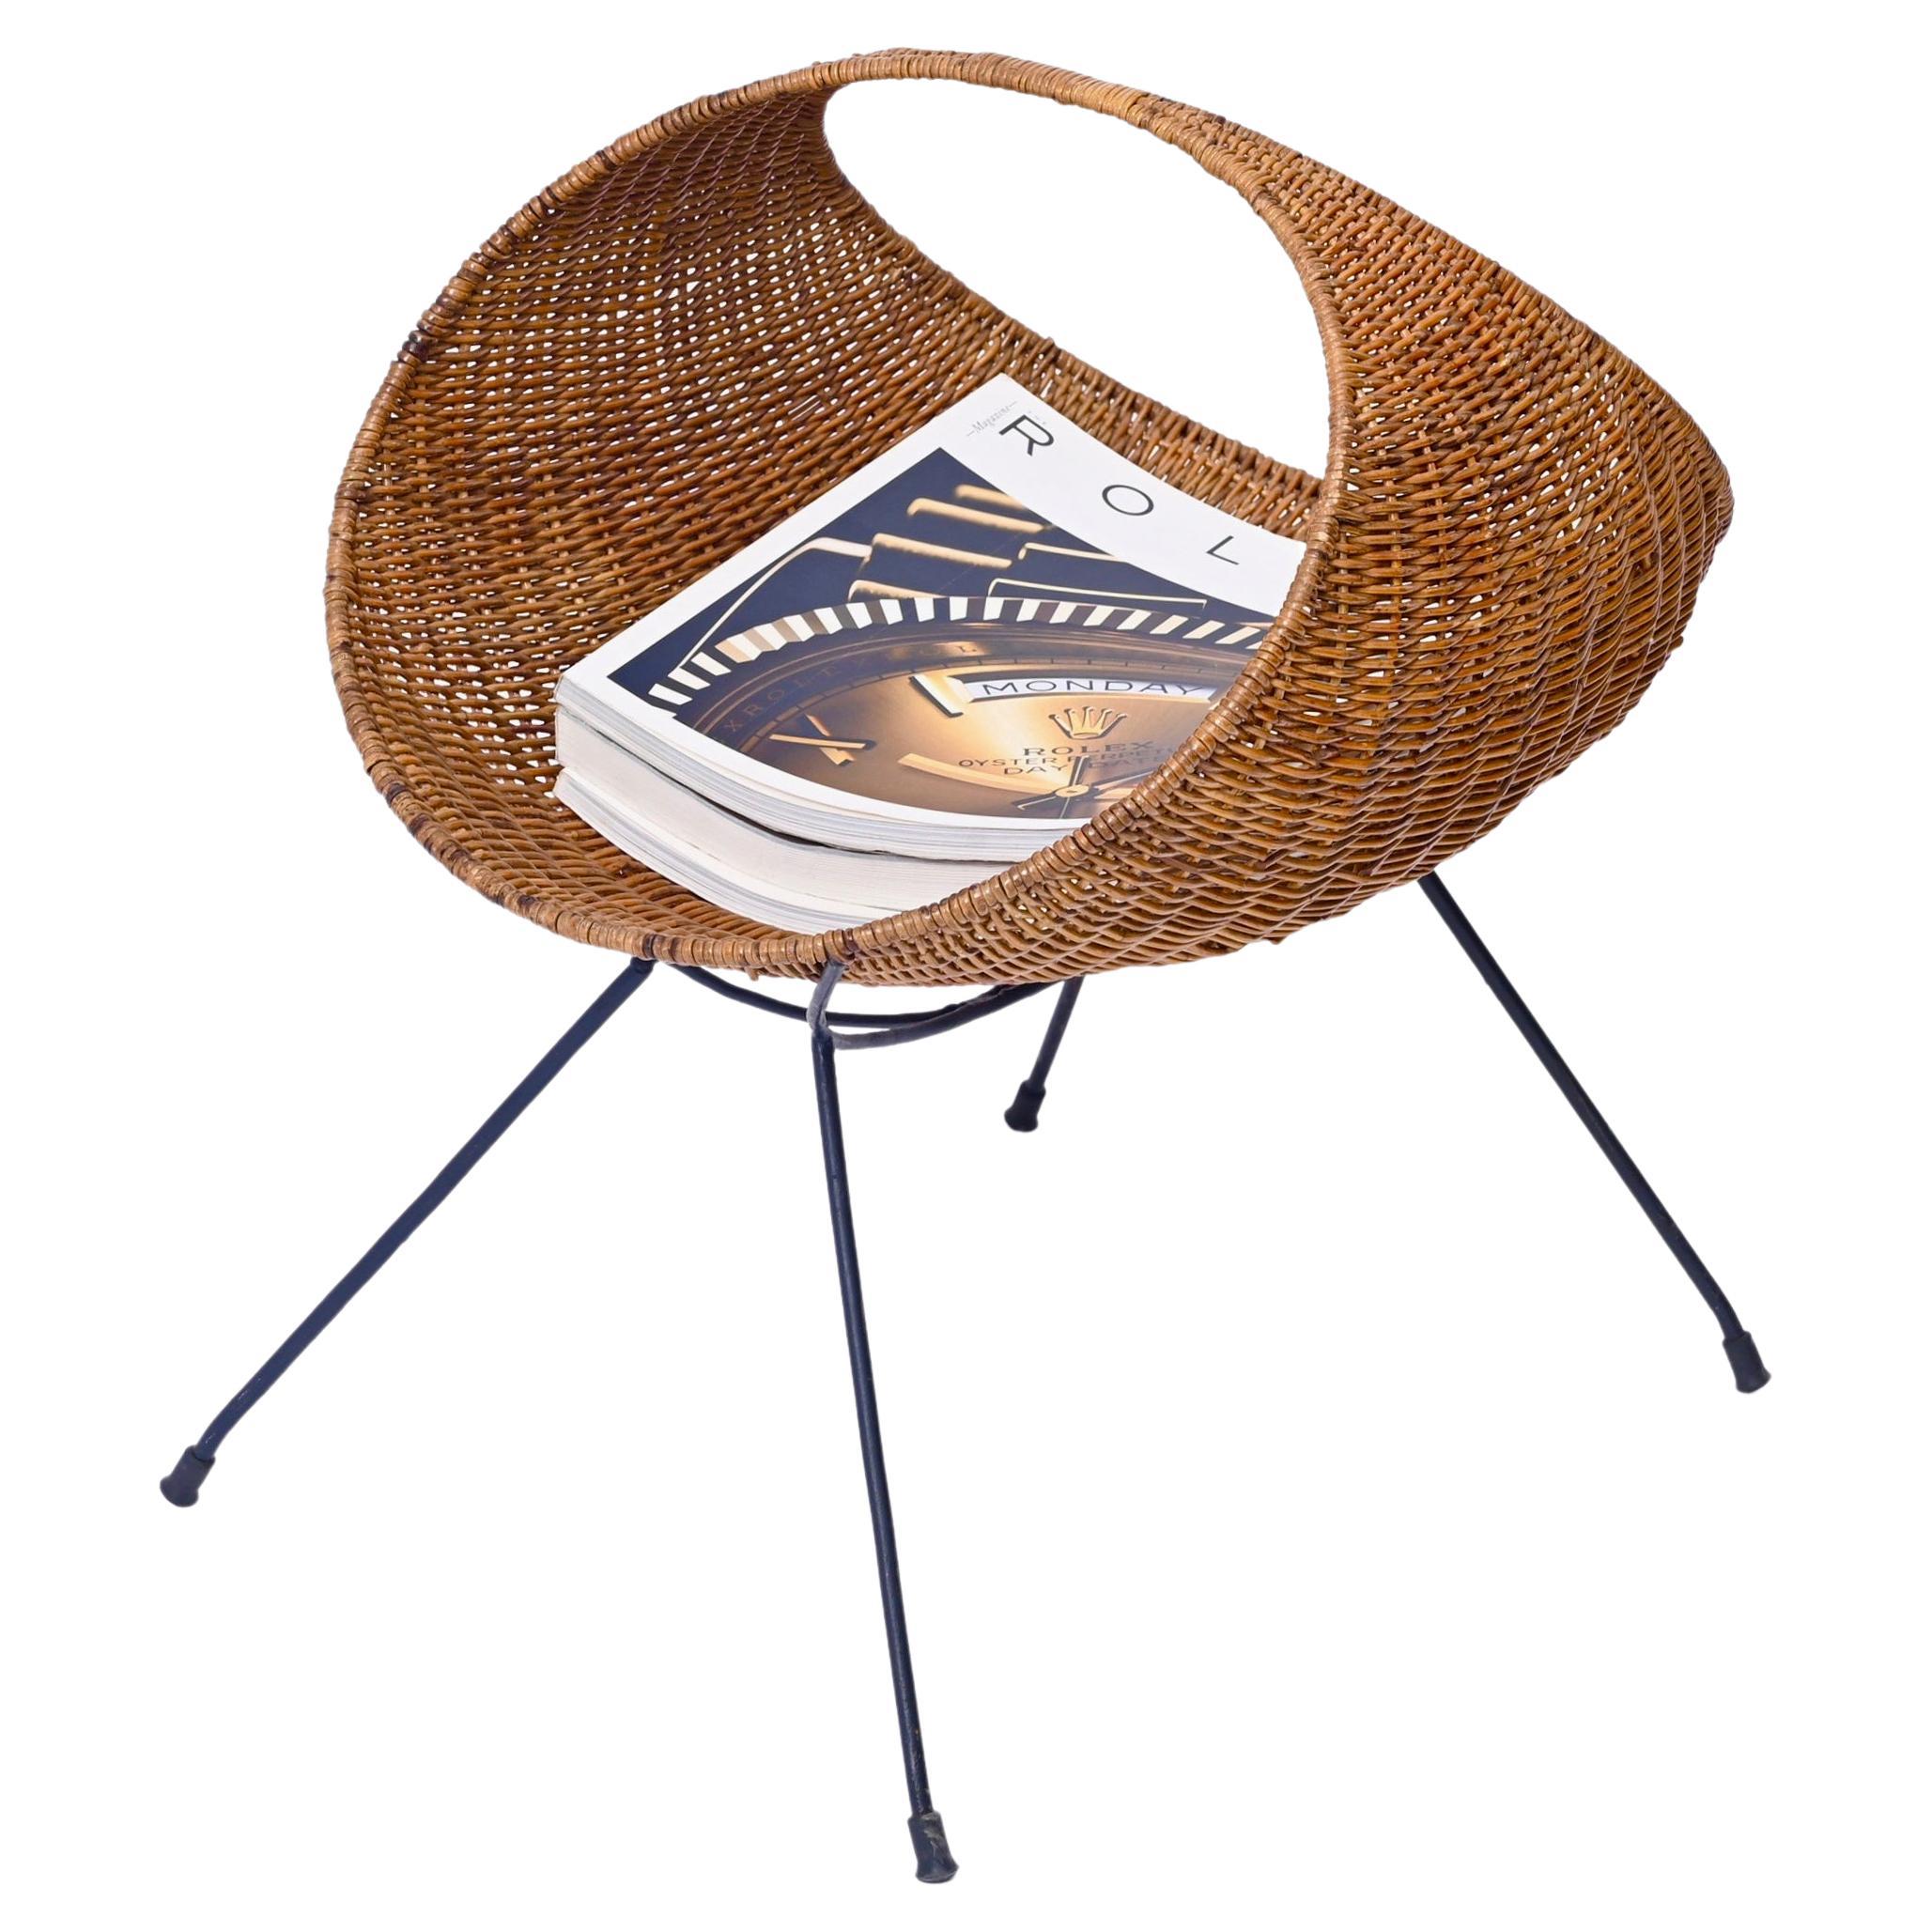 Campo & Graffi Magazine Rack in Wicker and Black Enameled Iron, Italy 1950s For Sale